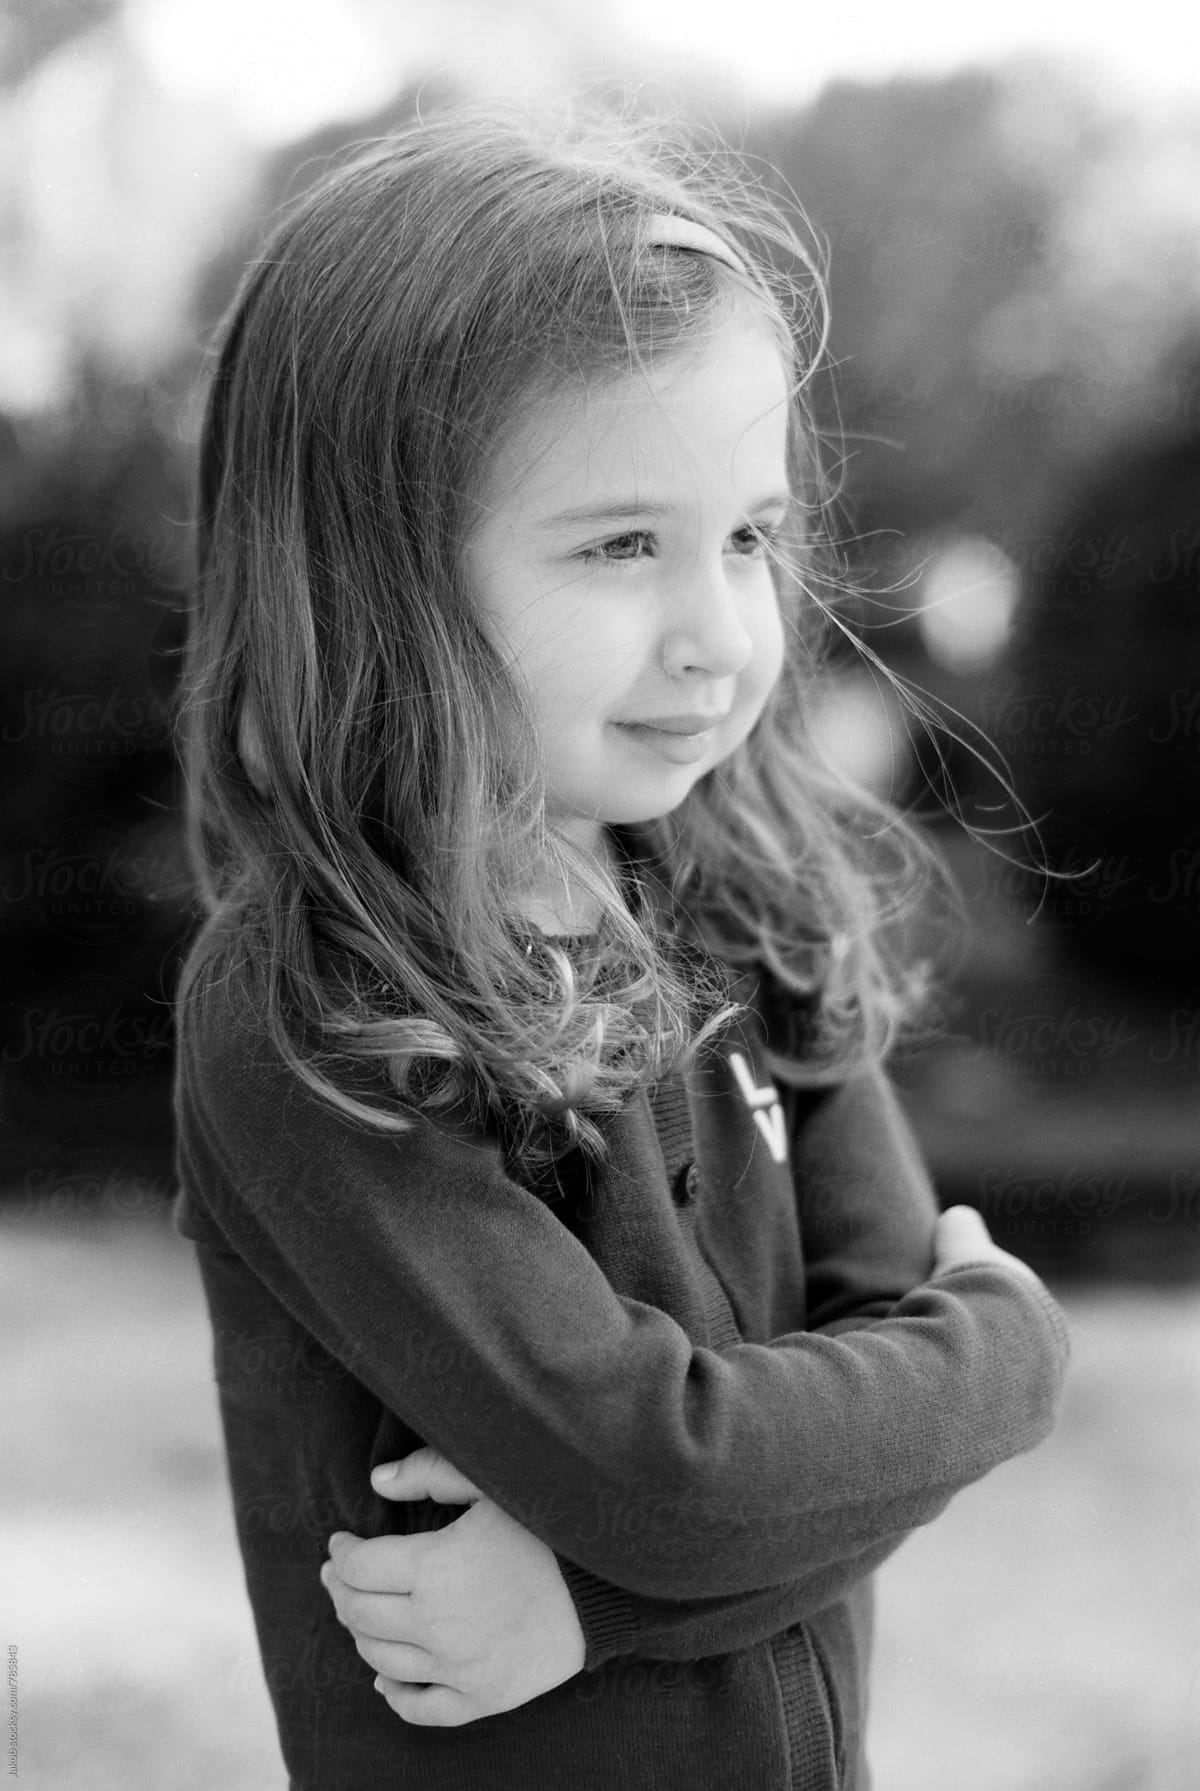 Black And White Profile Portrait Of A Beautiful Young Girl By Stocksy Contributor Jakob 